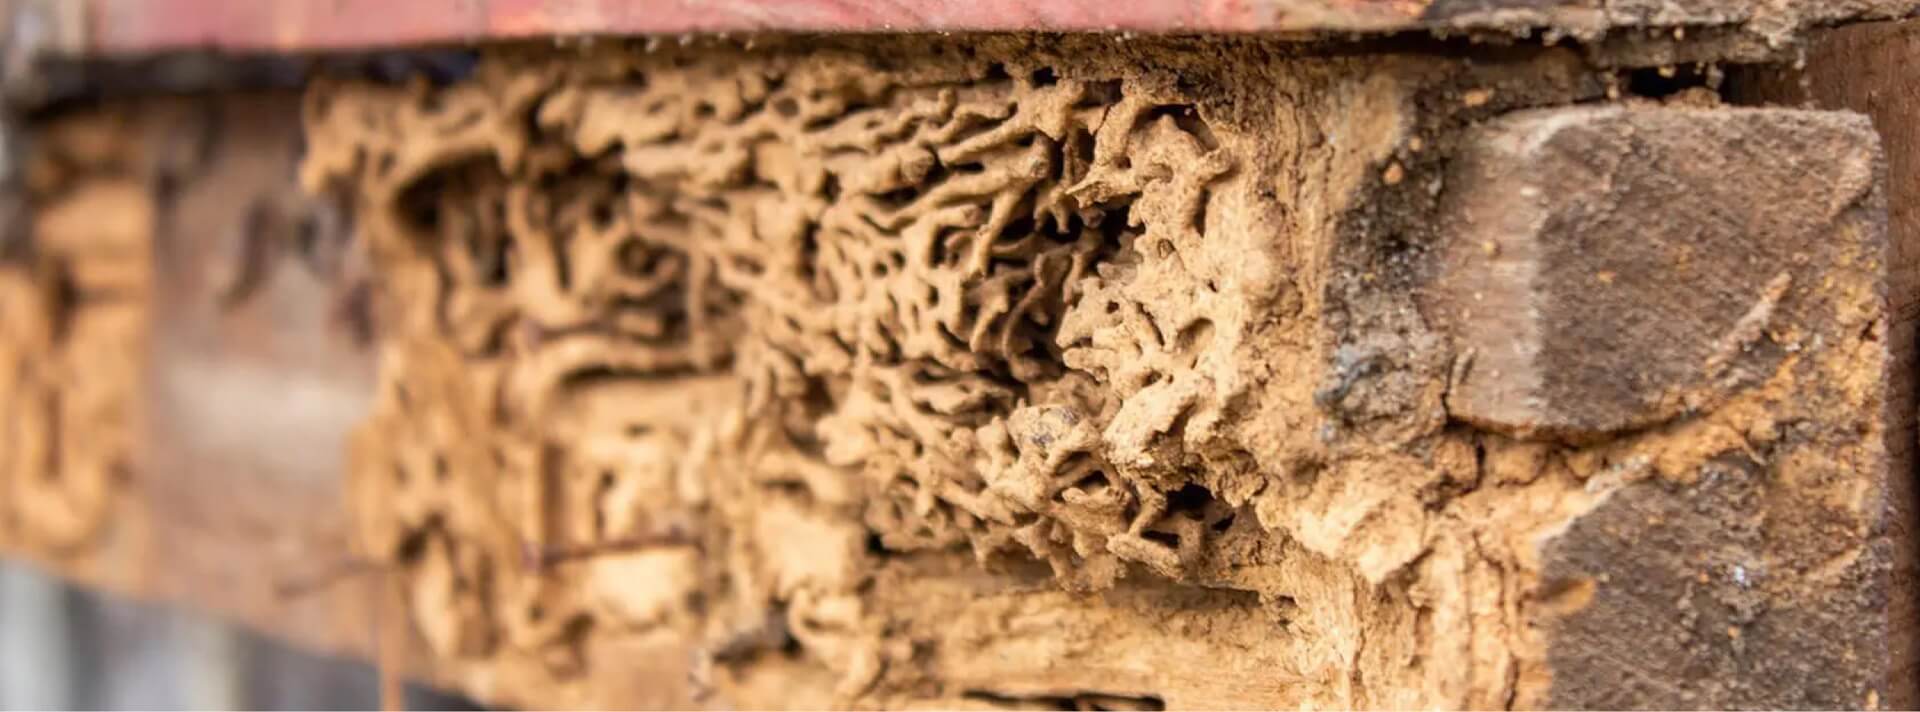 wood damage of a home by termites